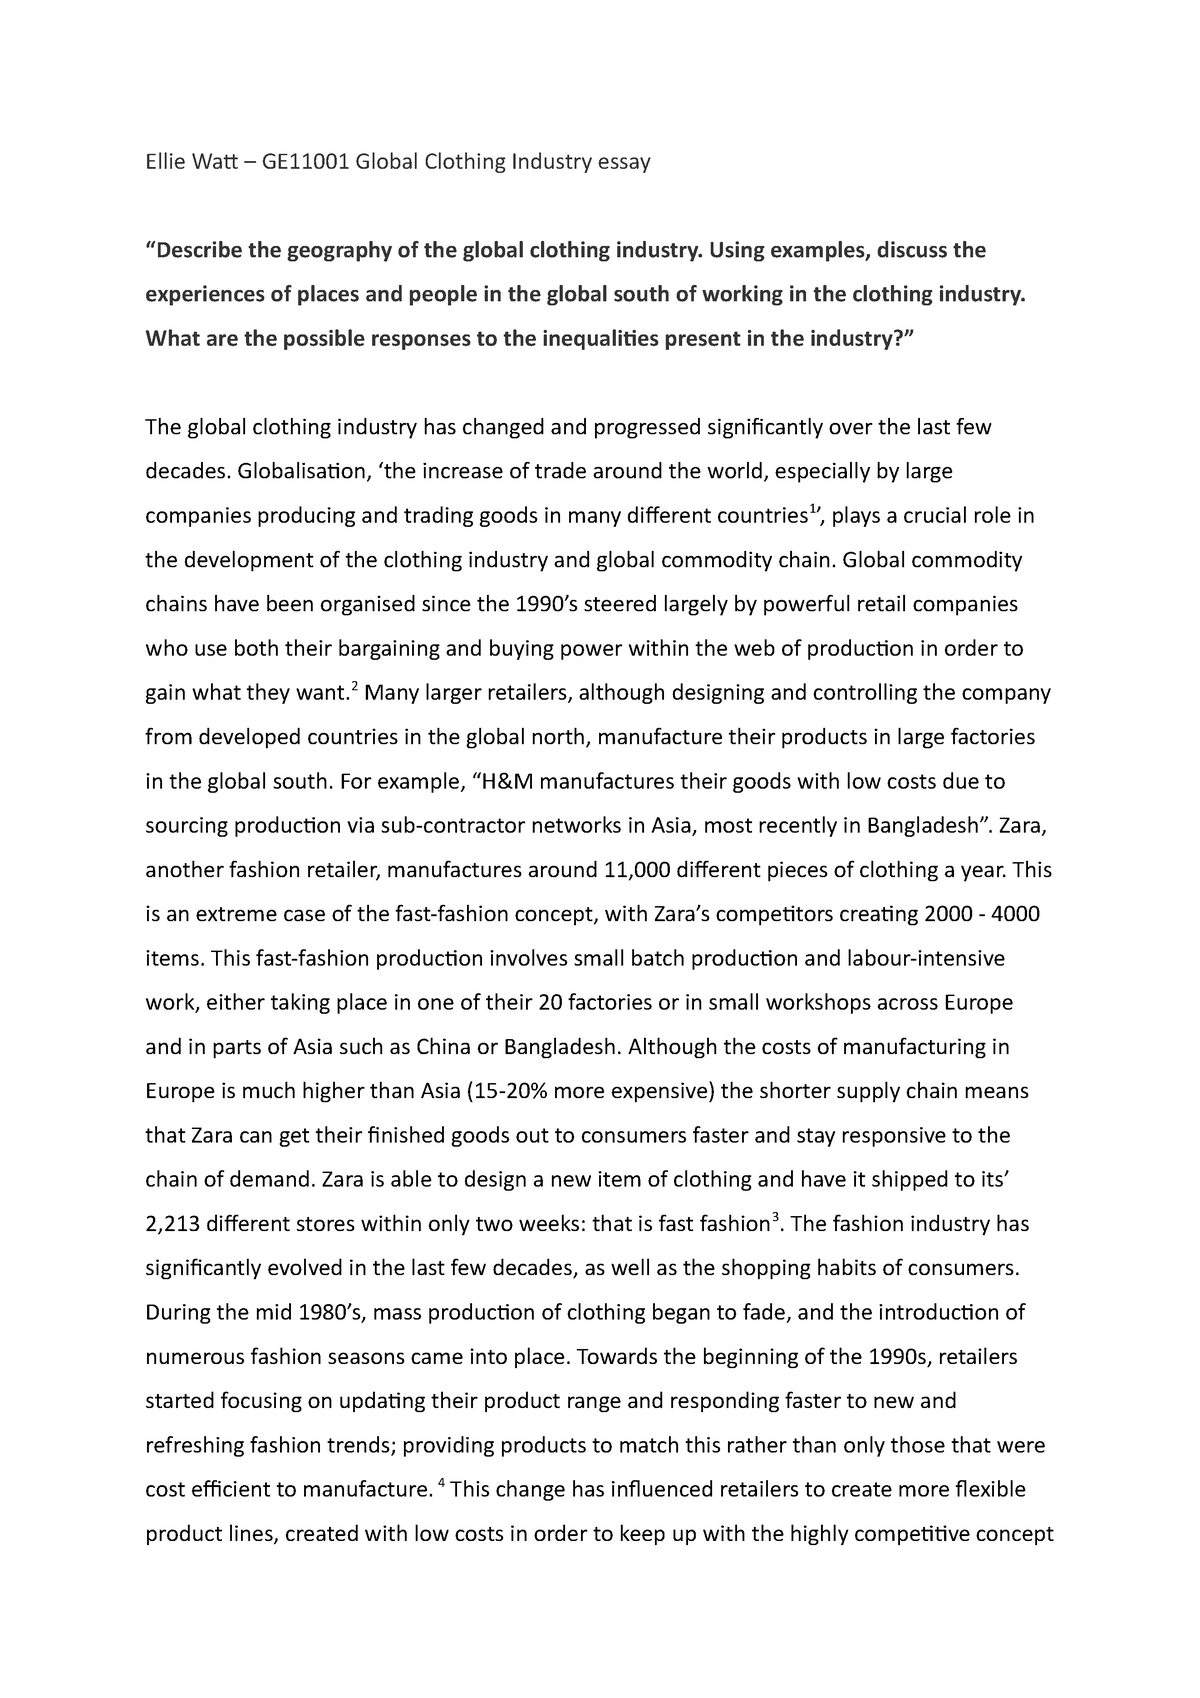 research paper about clothing business